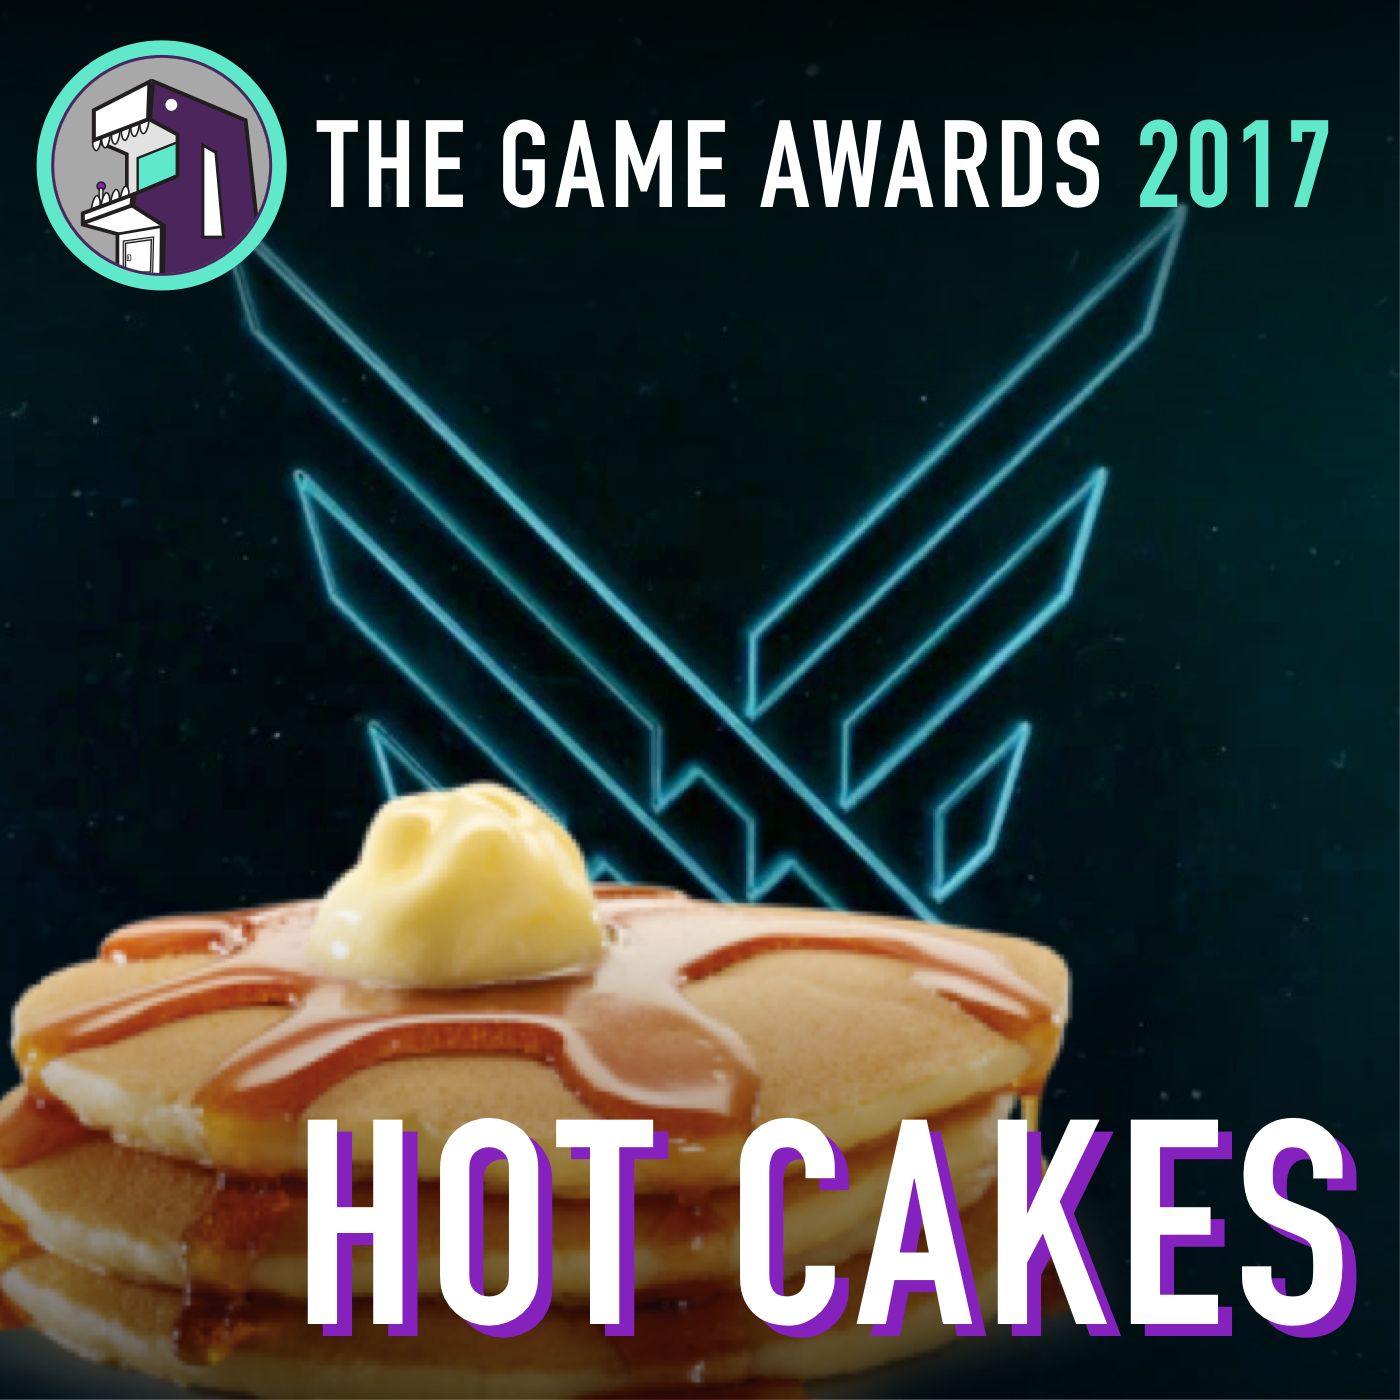 The Game Awards 2017 Hot Cakes!